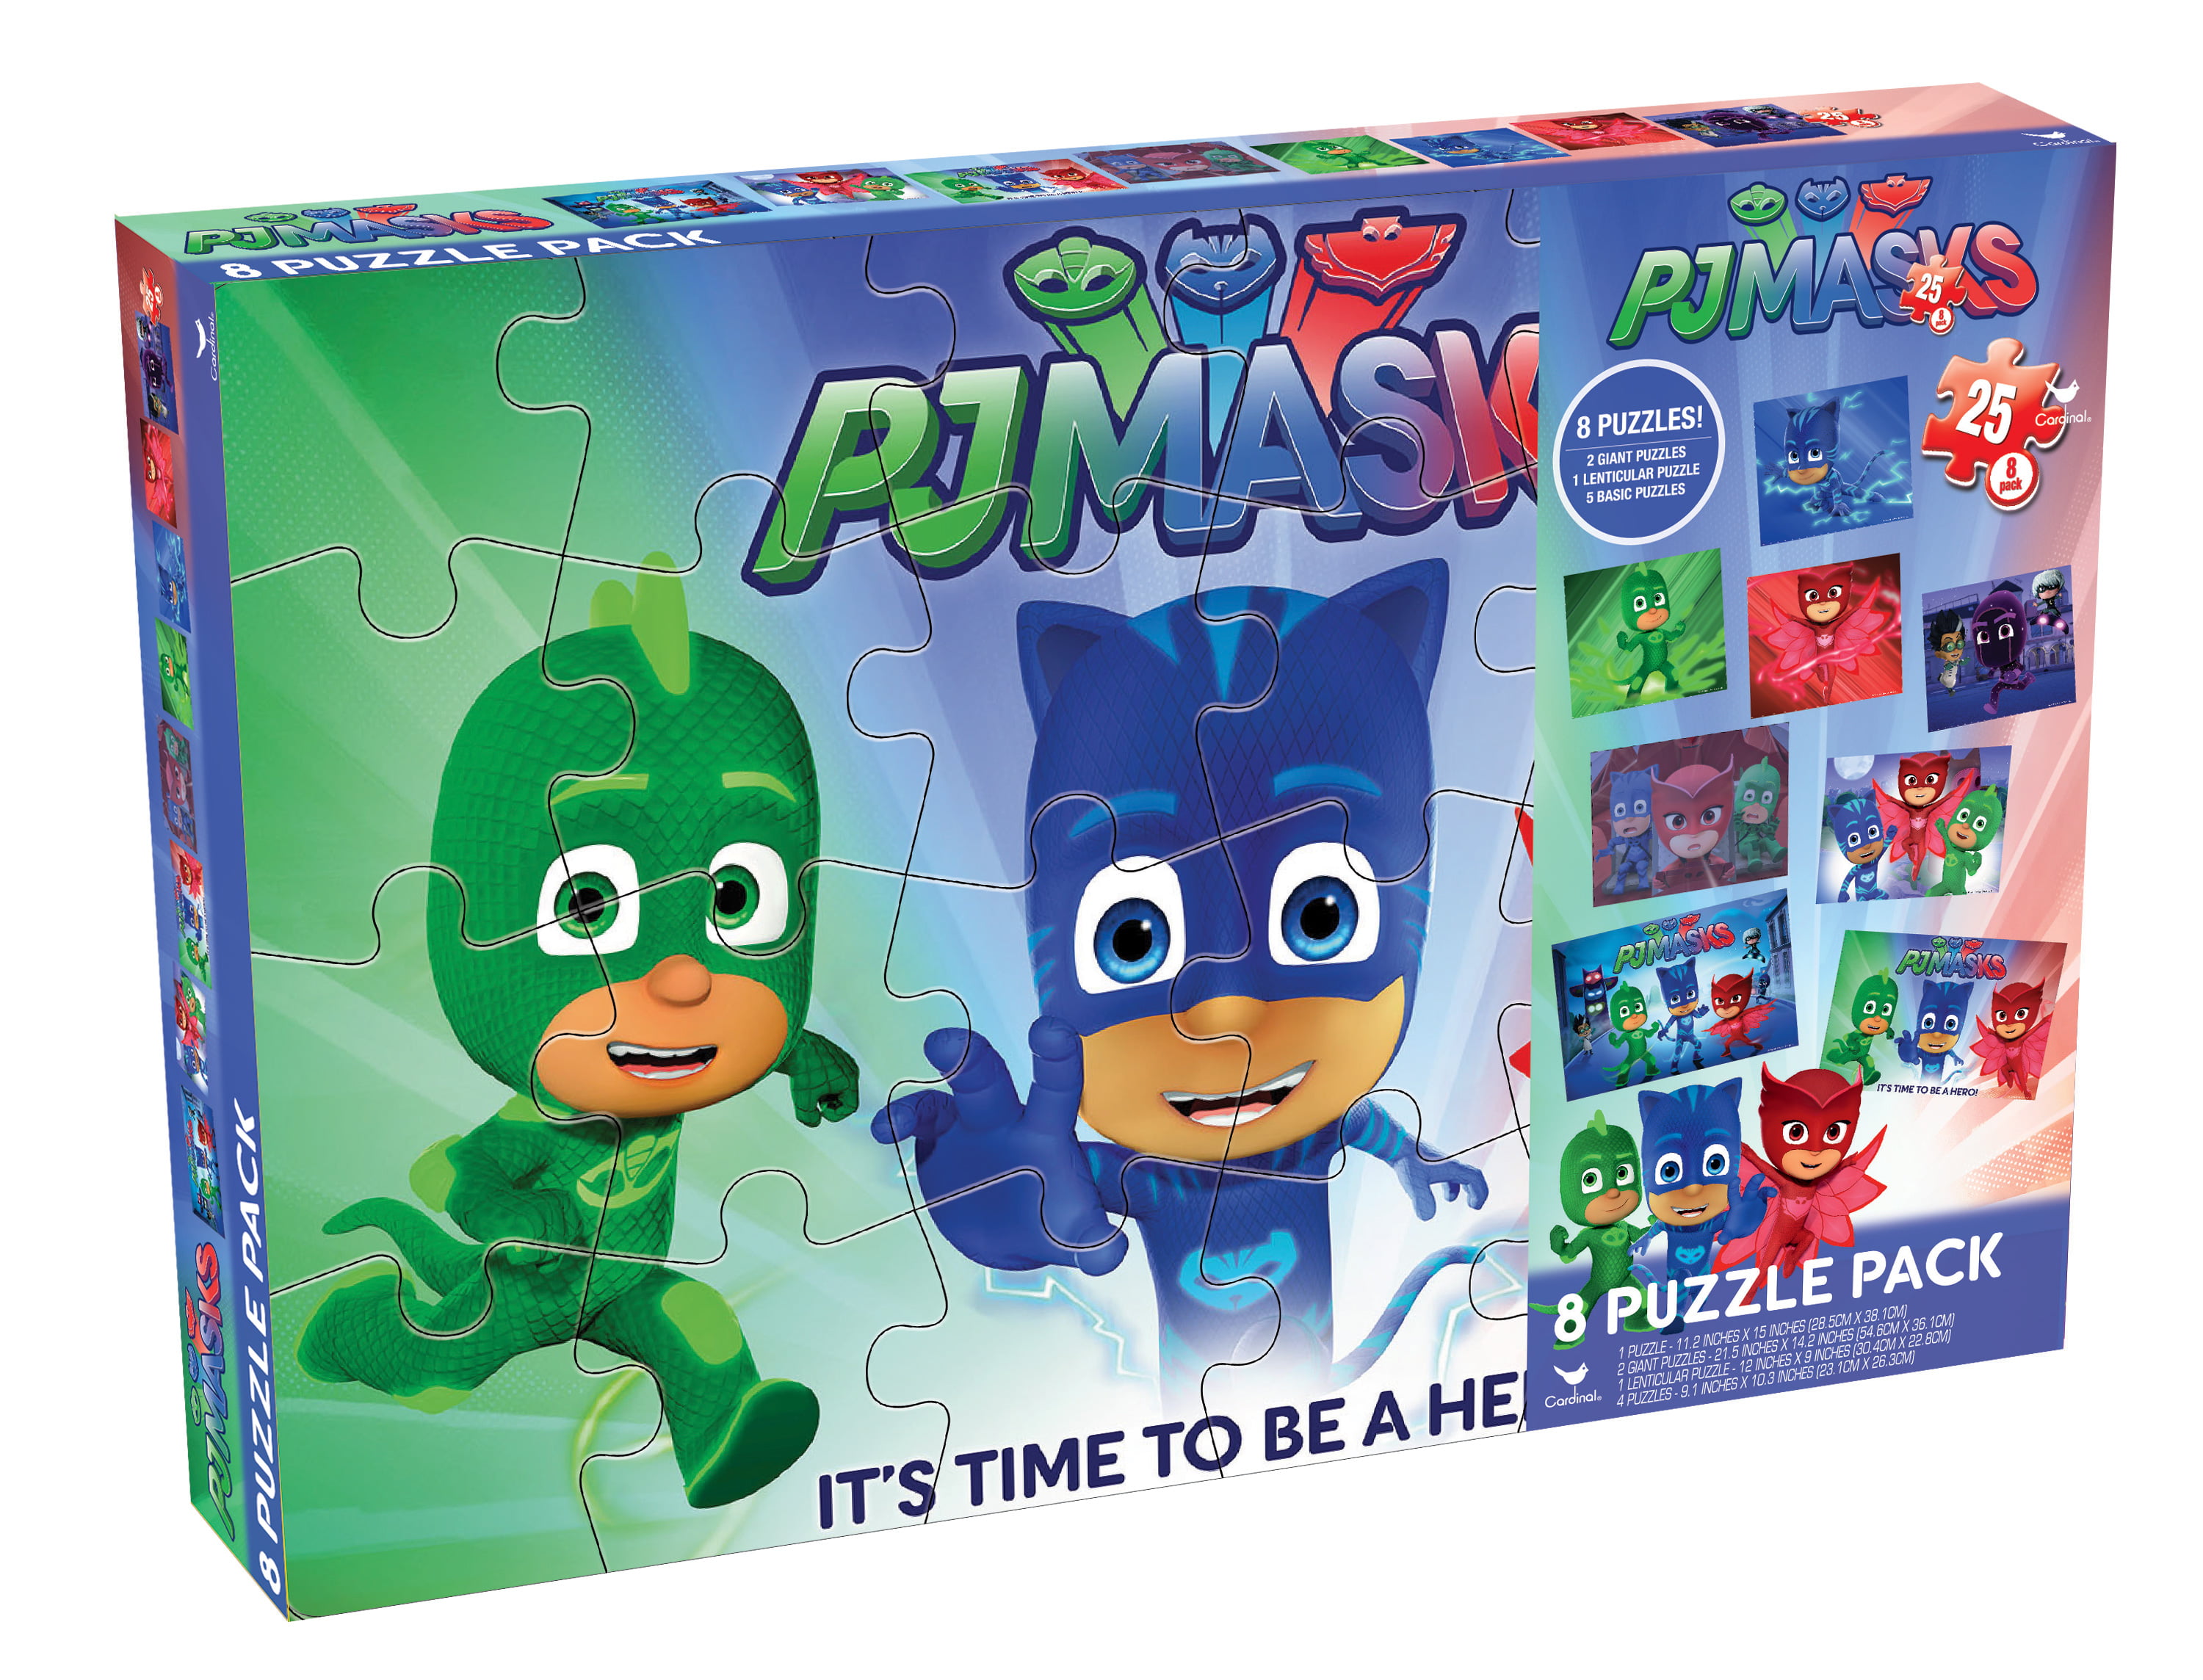 NEW PJMASKS 9 Piece Woodboard puzzle In Box/ Carrying Case with Handle 